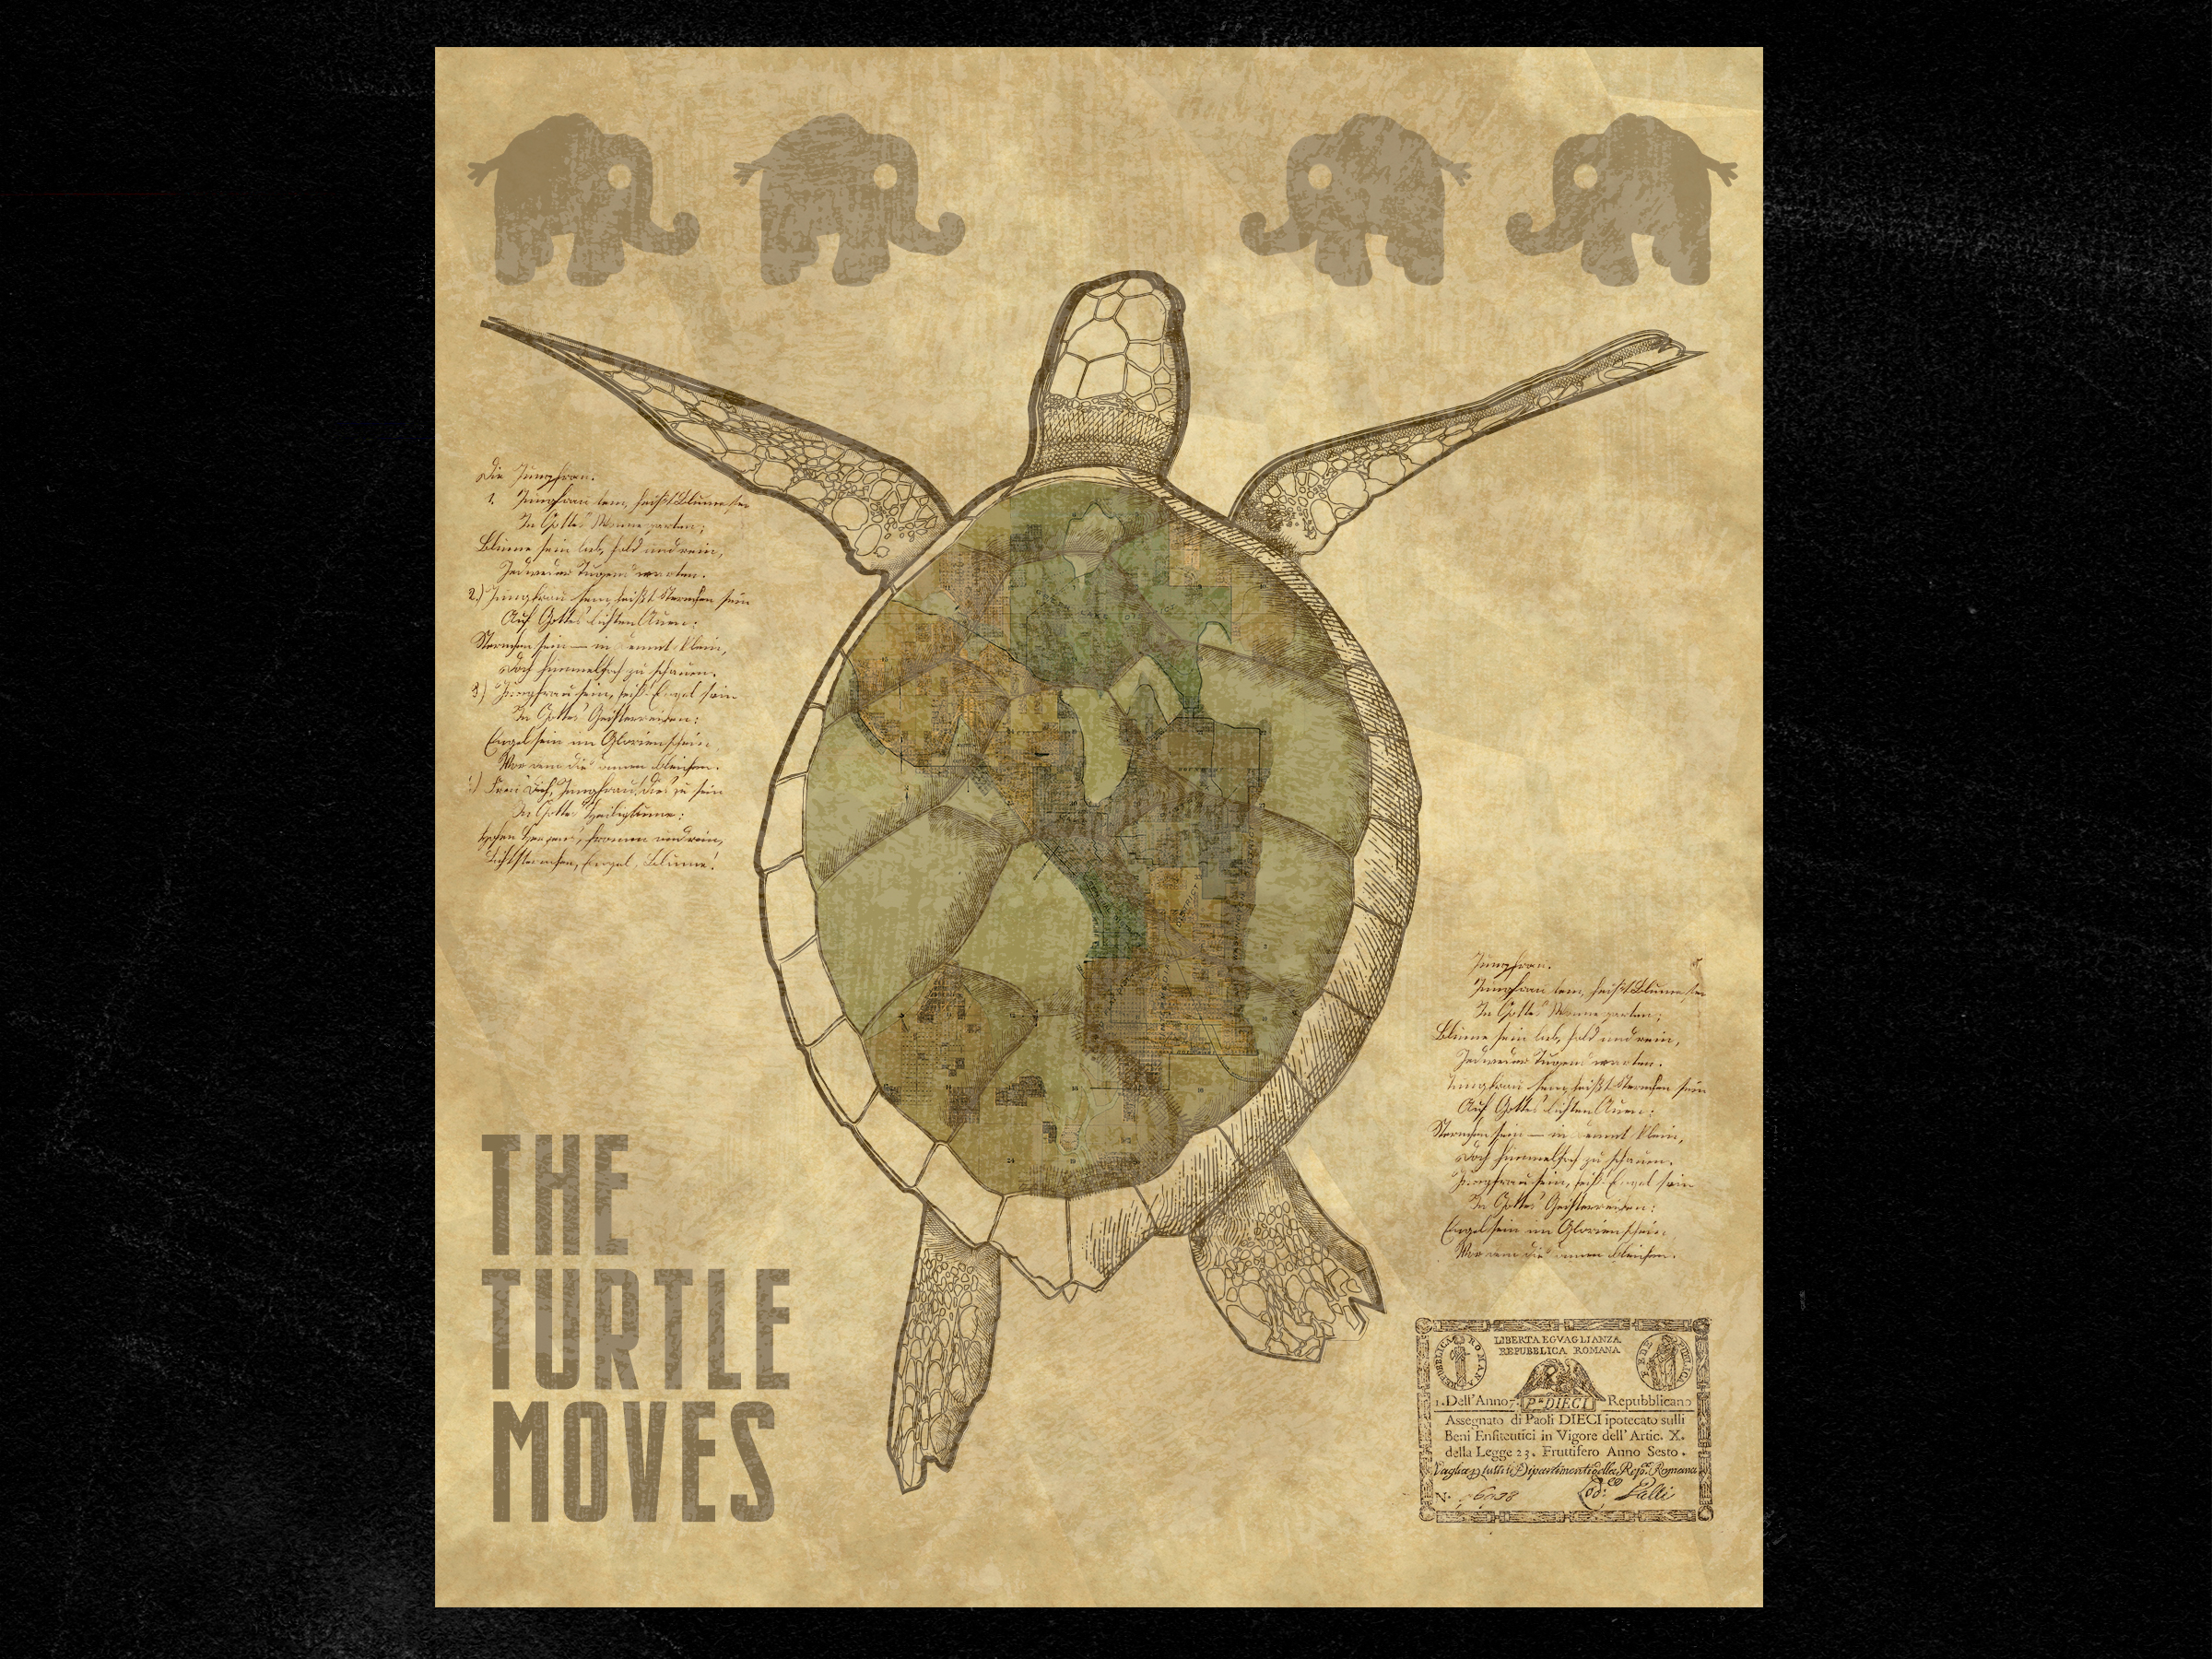 The Turtle moves…